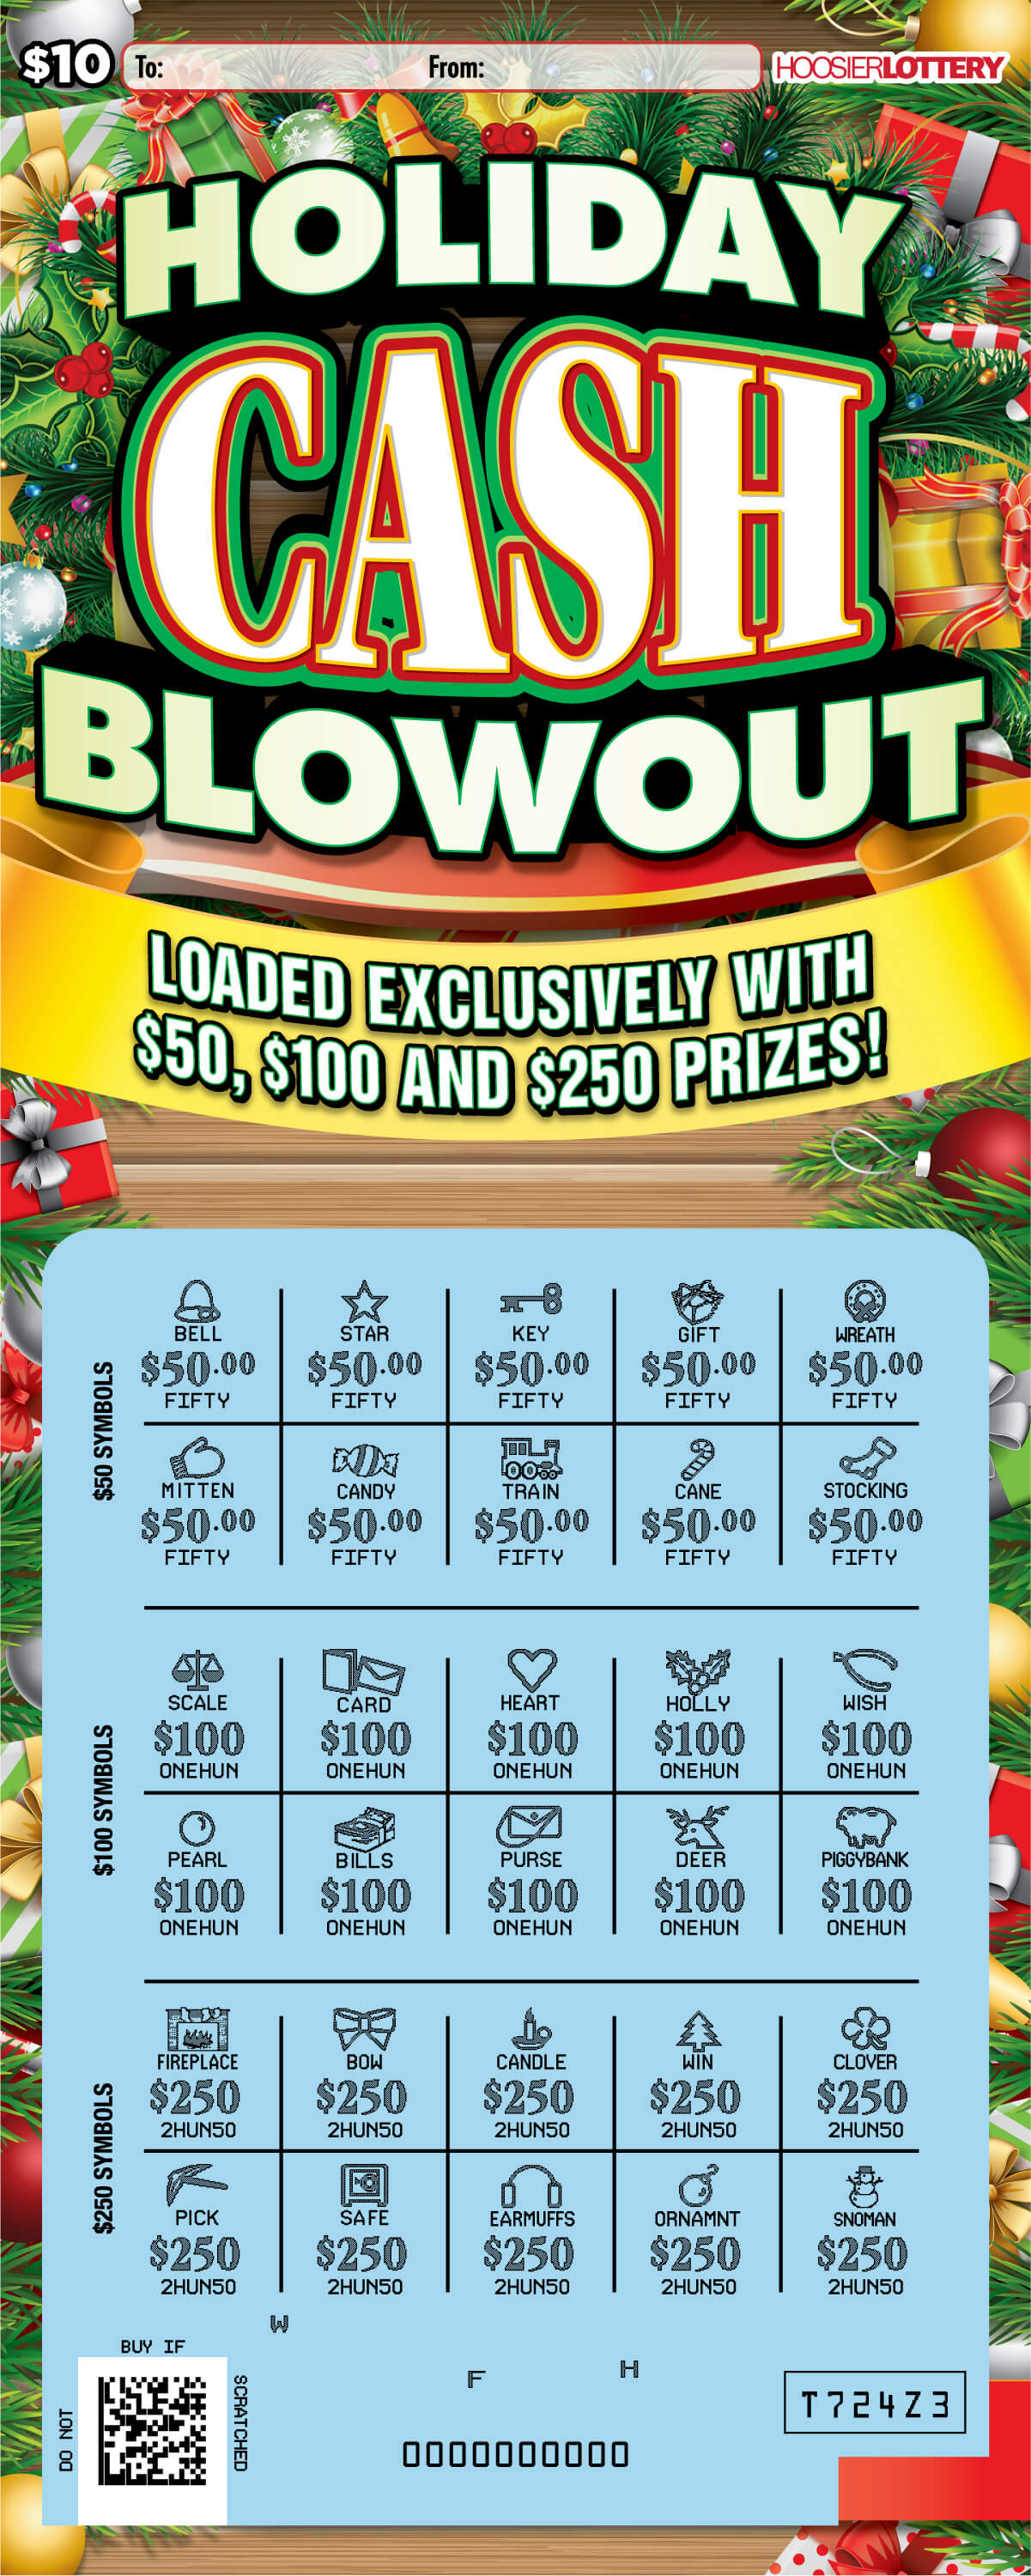 HOLIDAY CASH BLOWOUT